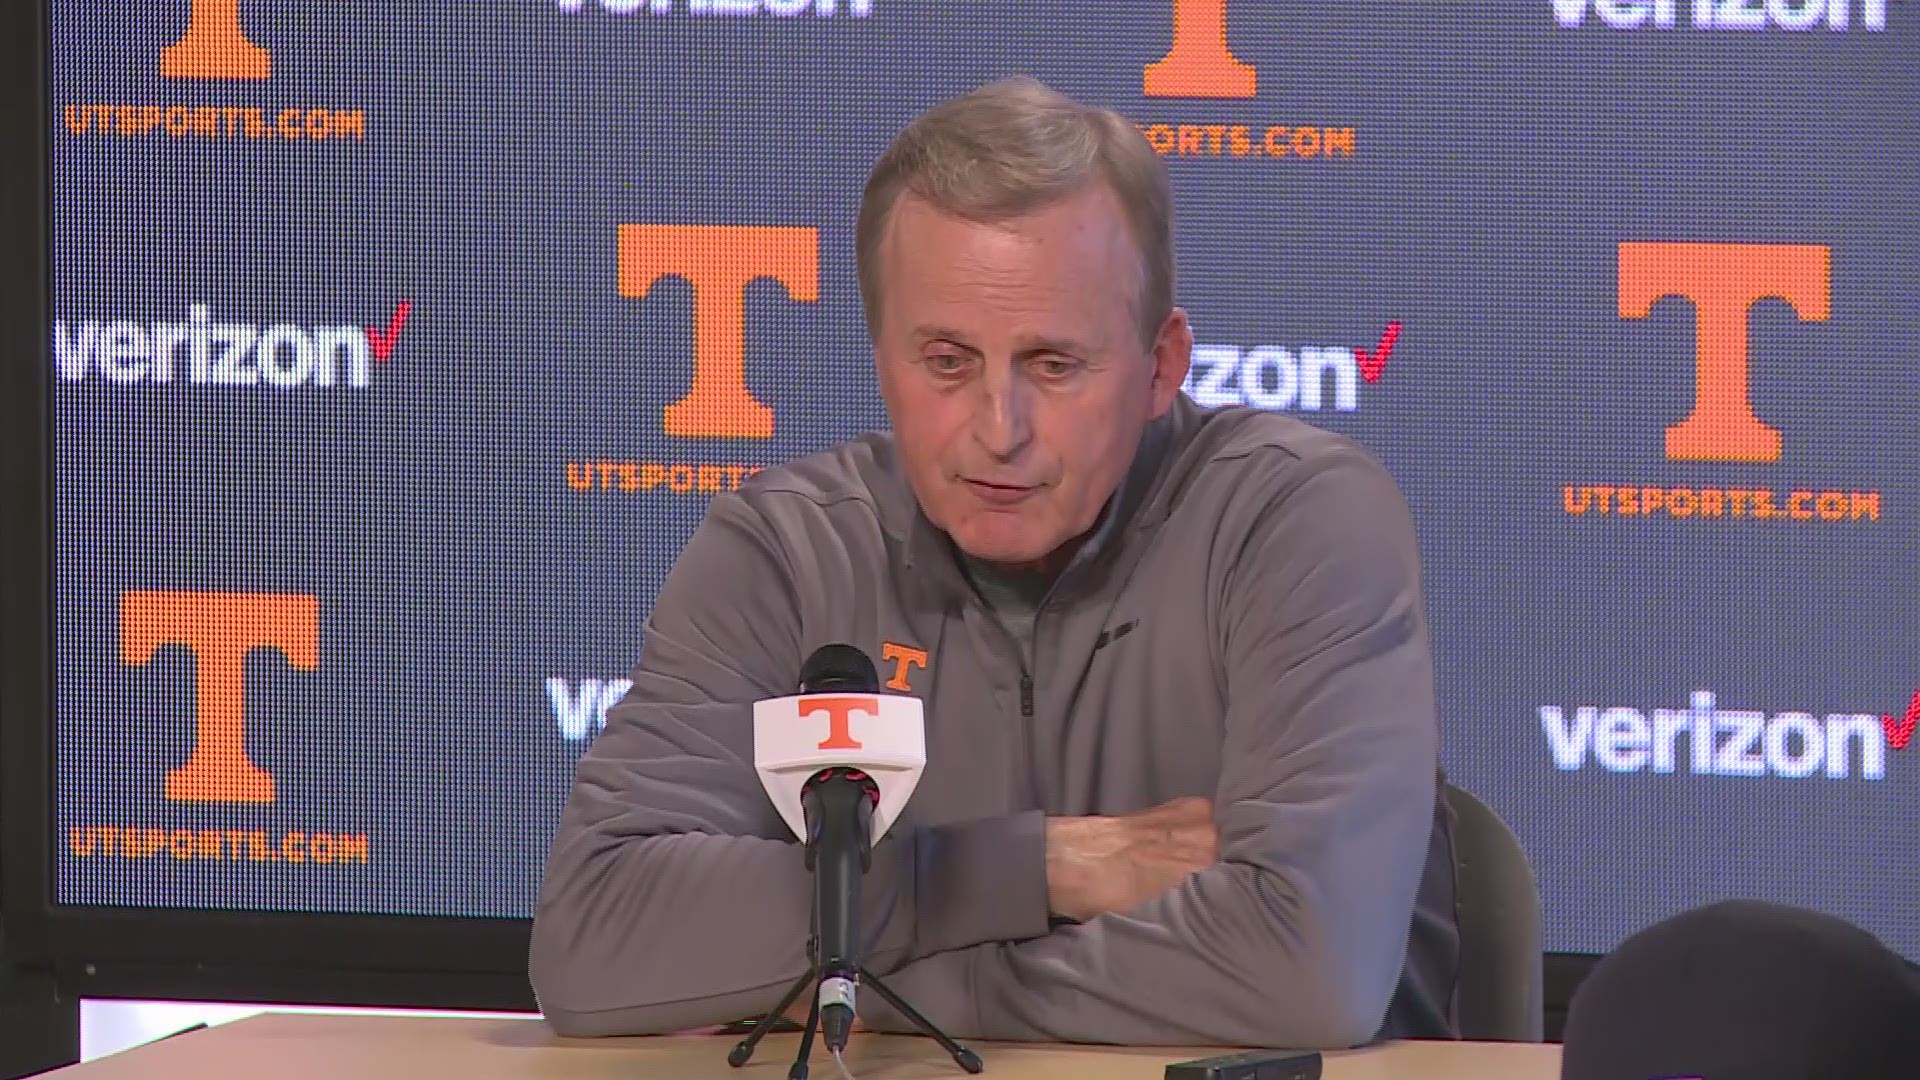 Last week Rick Barnes turned down UCLA to stay at Tennessee. He was very close to taking the Bruins job and says his interest was purely based on his respect for the program and legendary coach John Wooden.